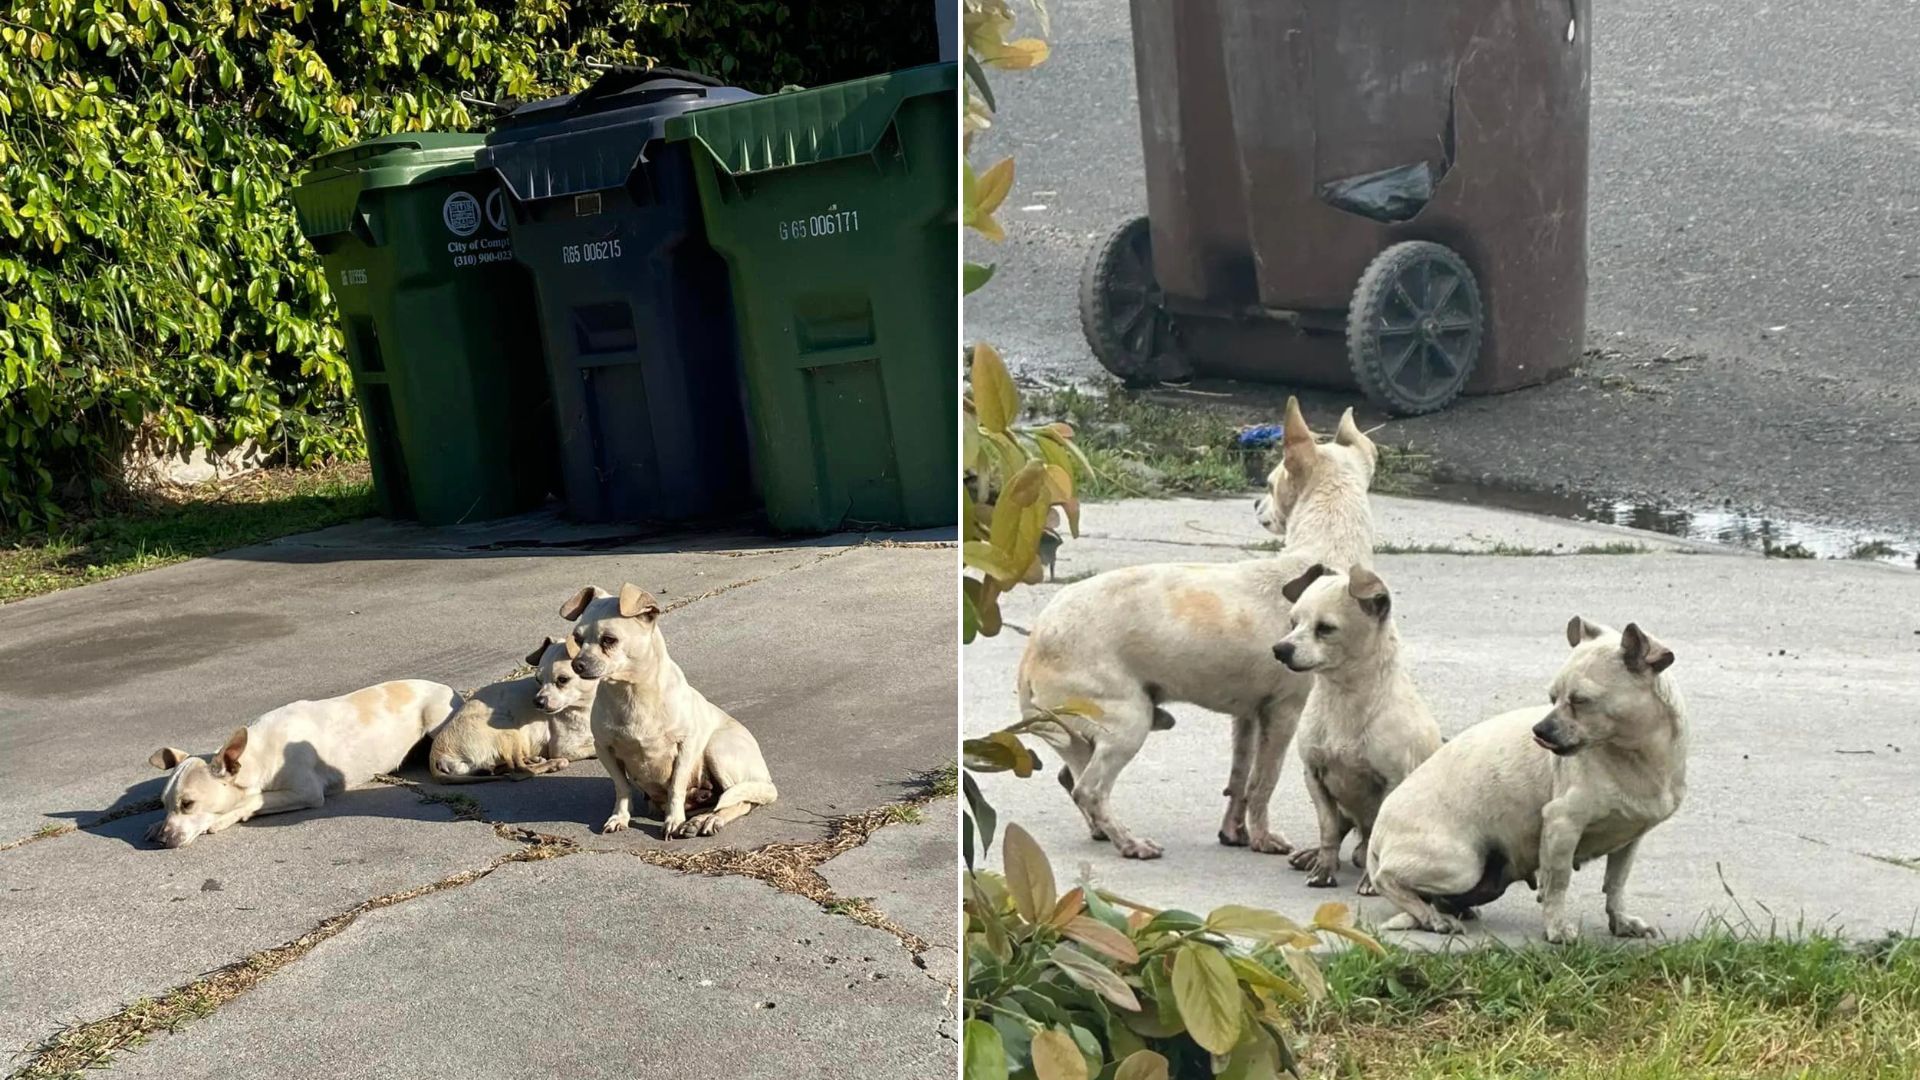 Sweet Trio Of Abandoned Pups Loyally Stayed By Each Other’s Side While Waiting For A Kind Soul To Notice Them